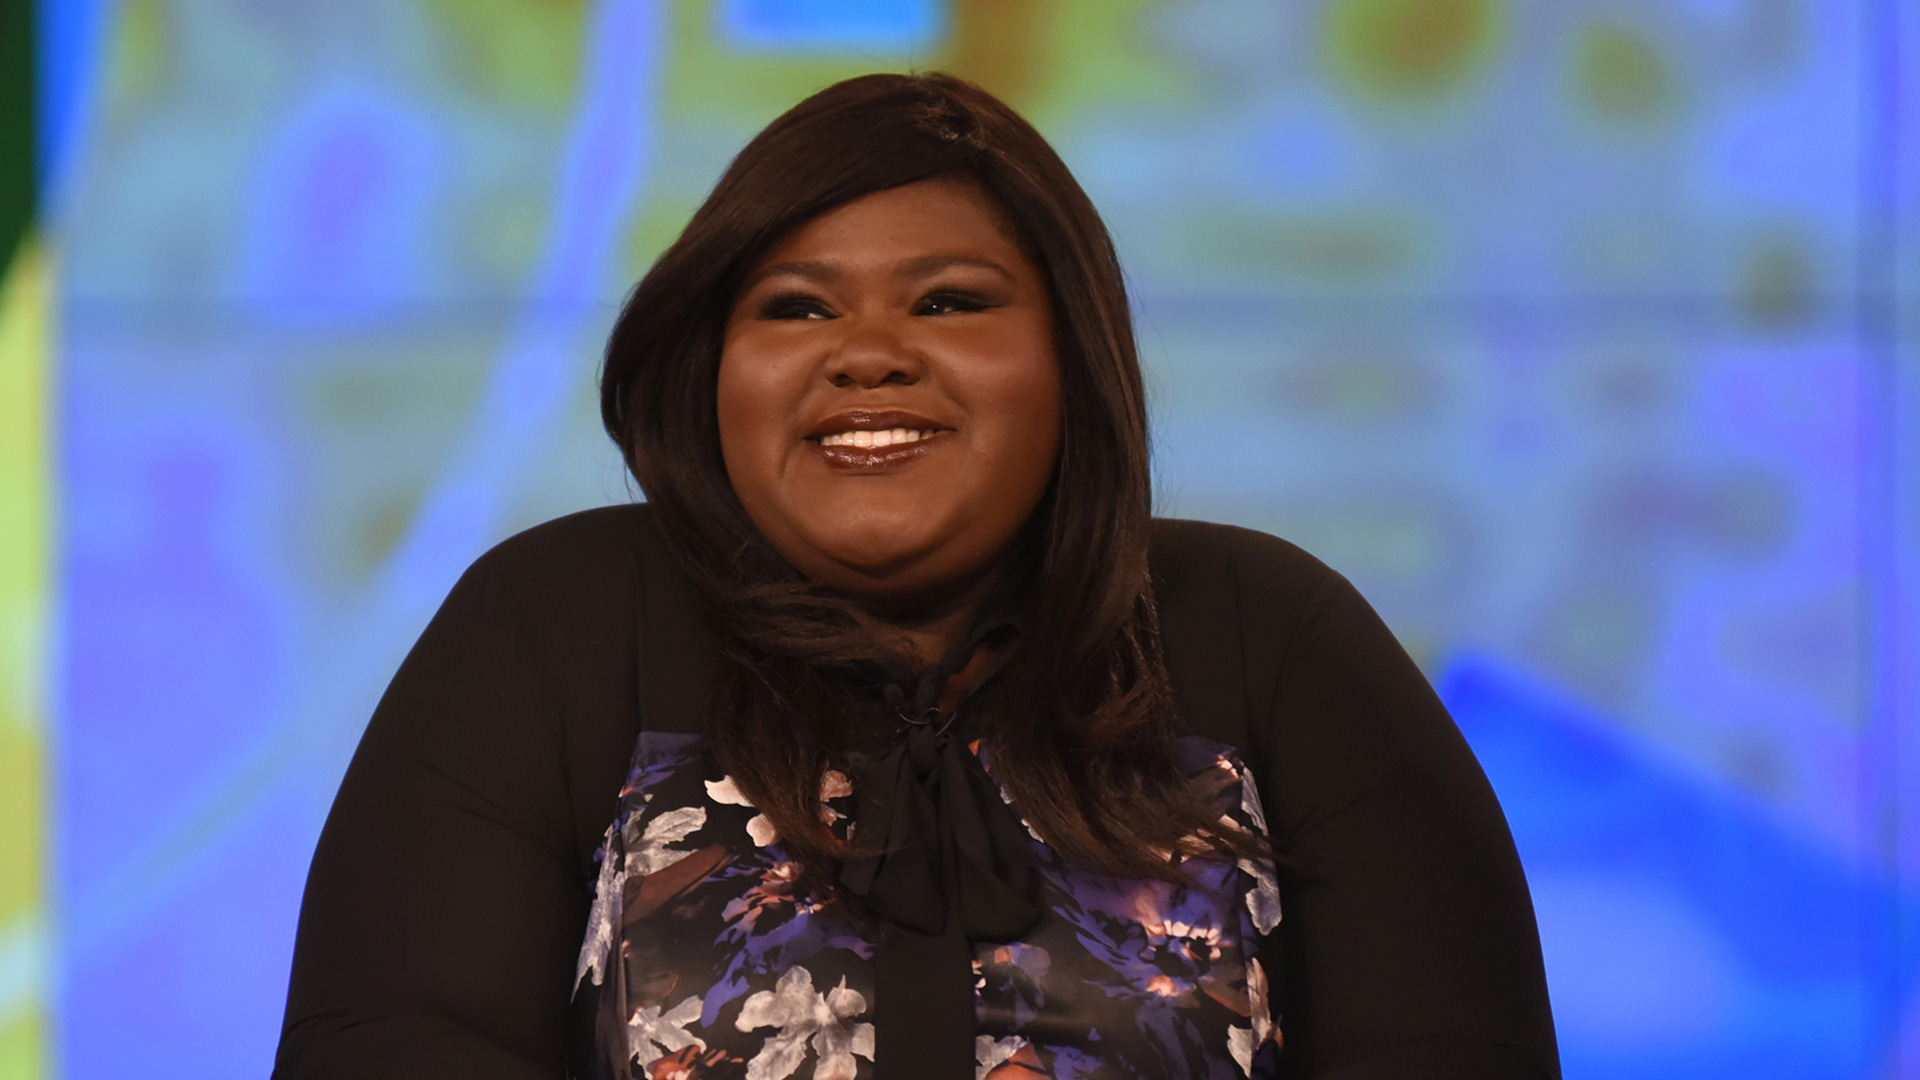 May 6, 1983: Gabourey Sidibe Was Born and Challenged Hollywood's Obsession With Weight